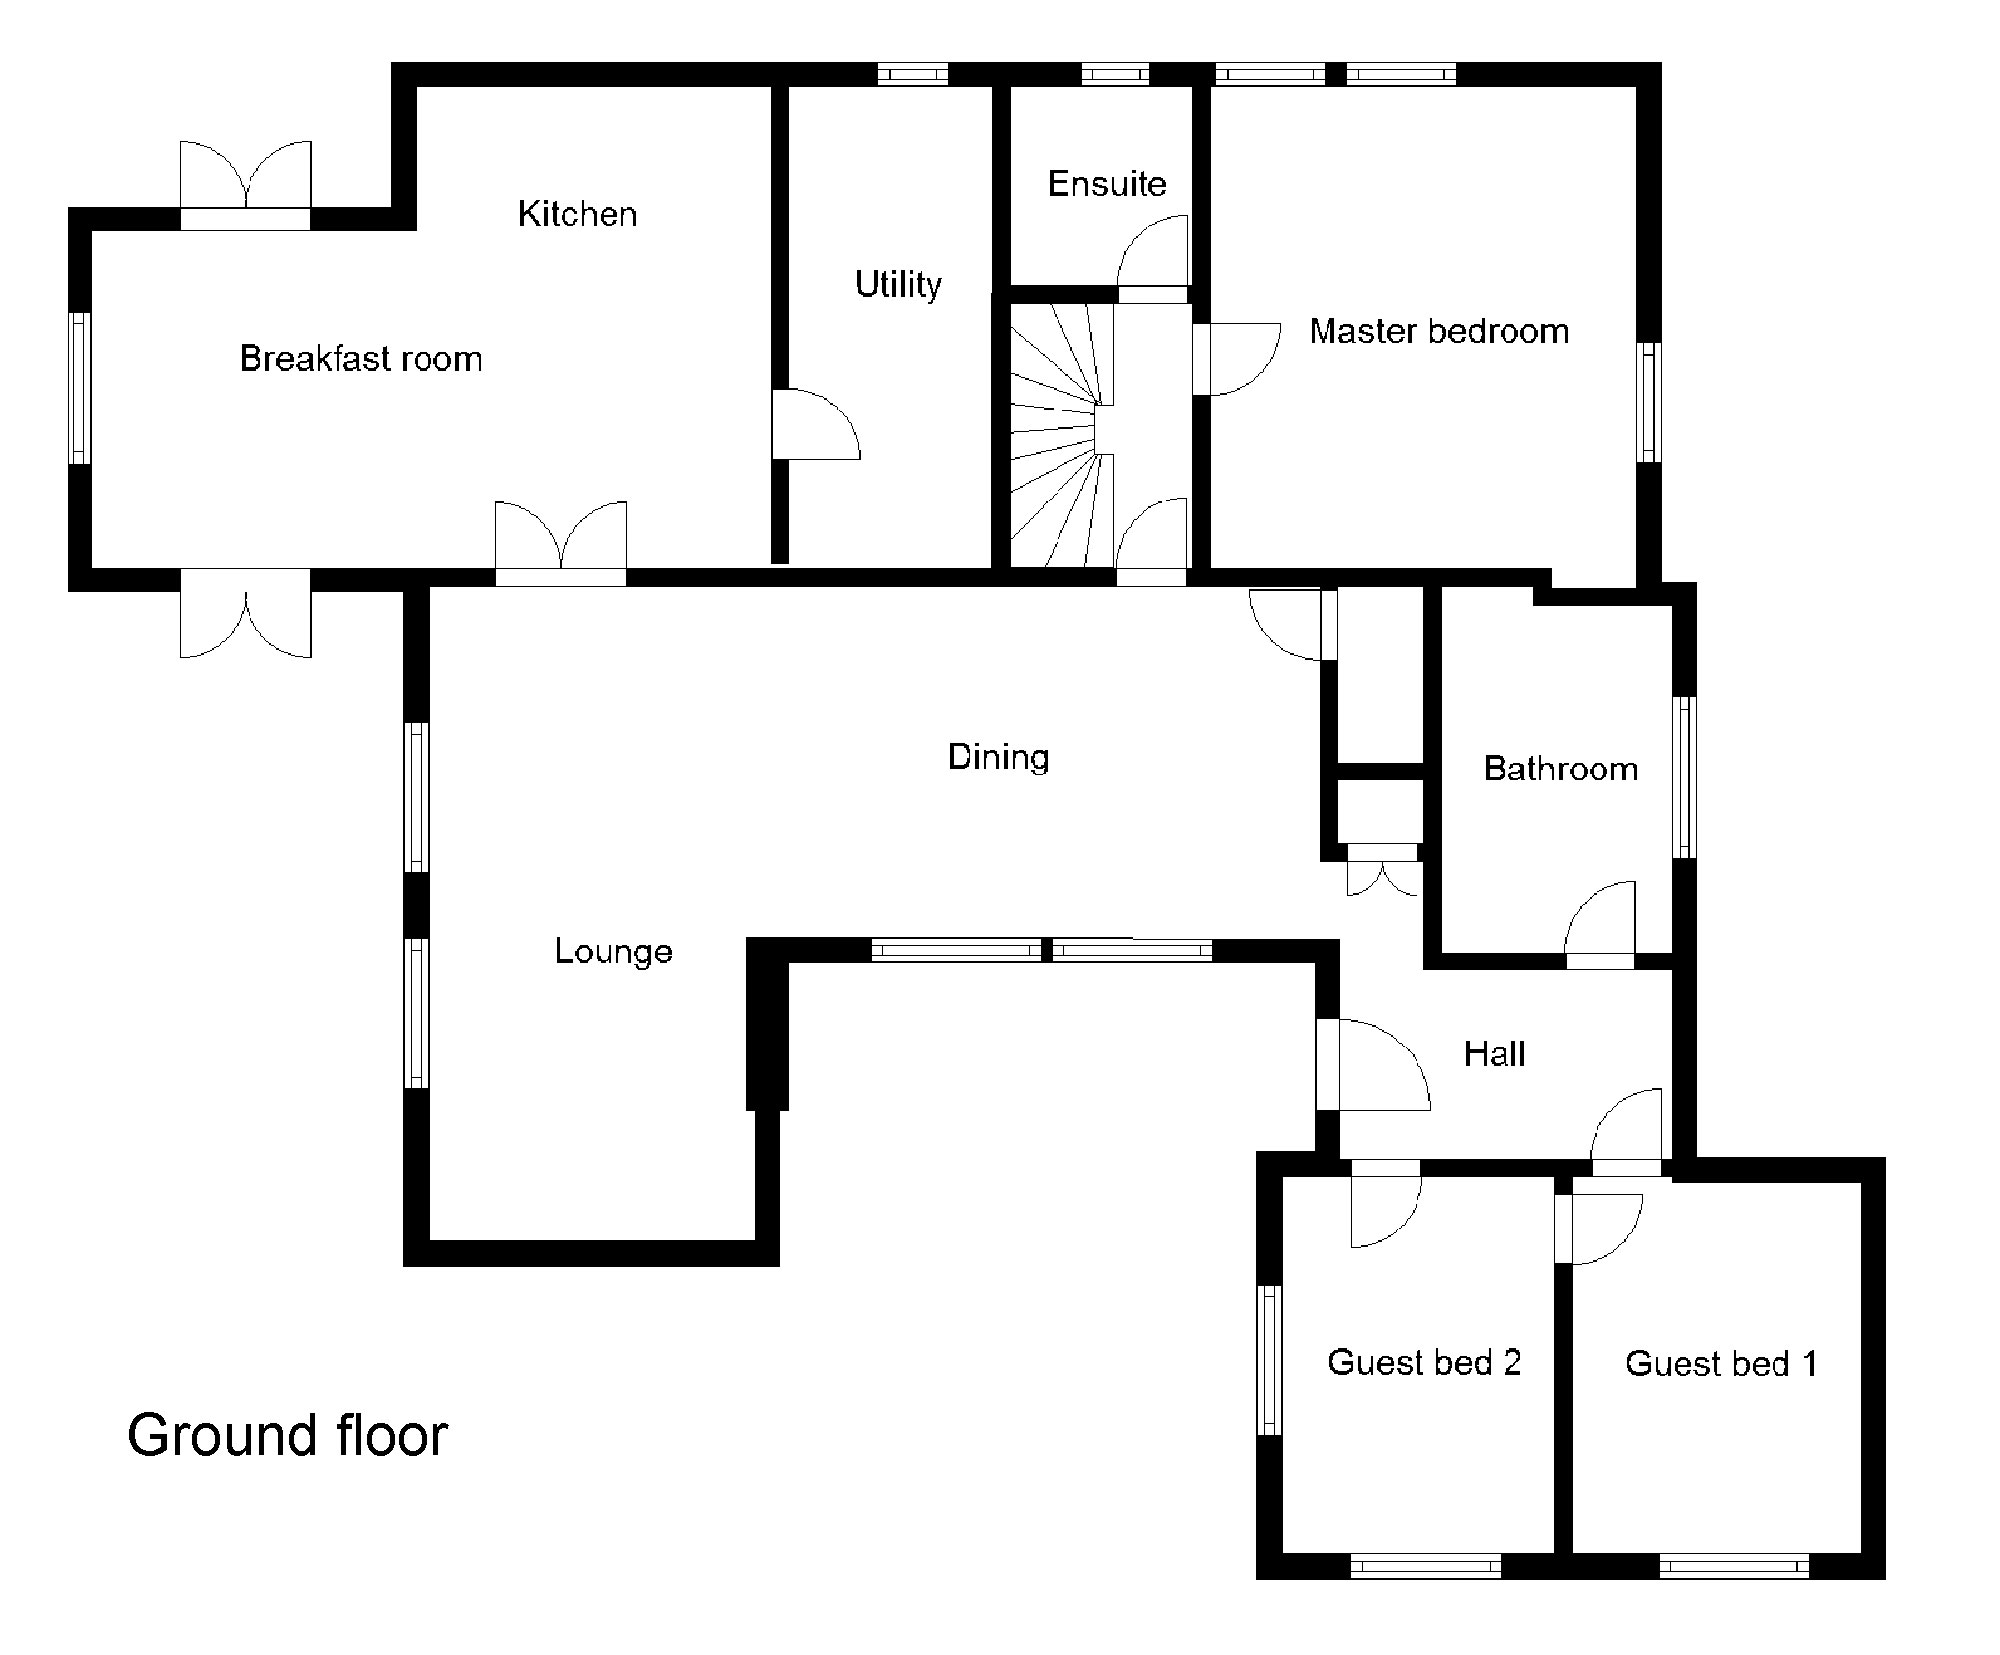 Ground floor plans for renovated bungalow